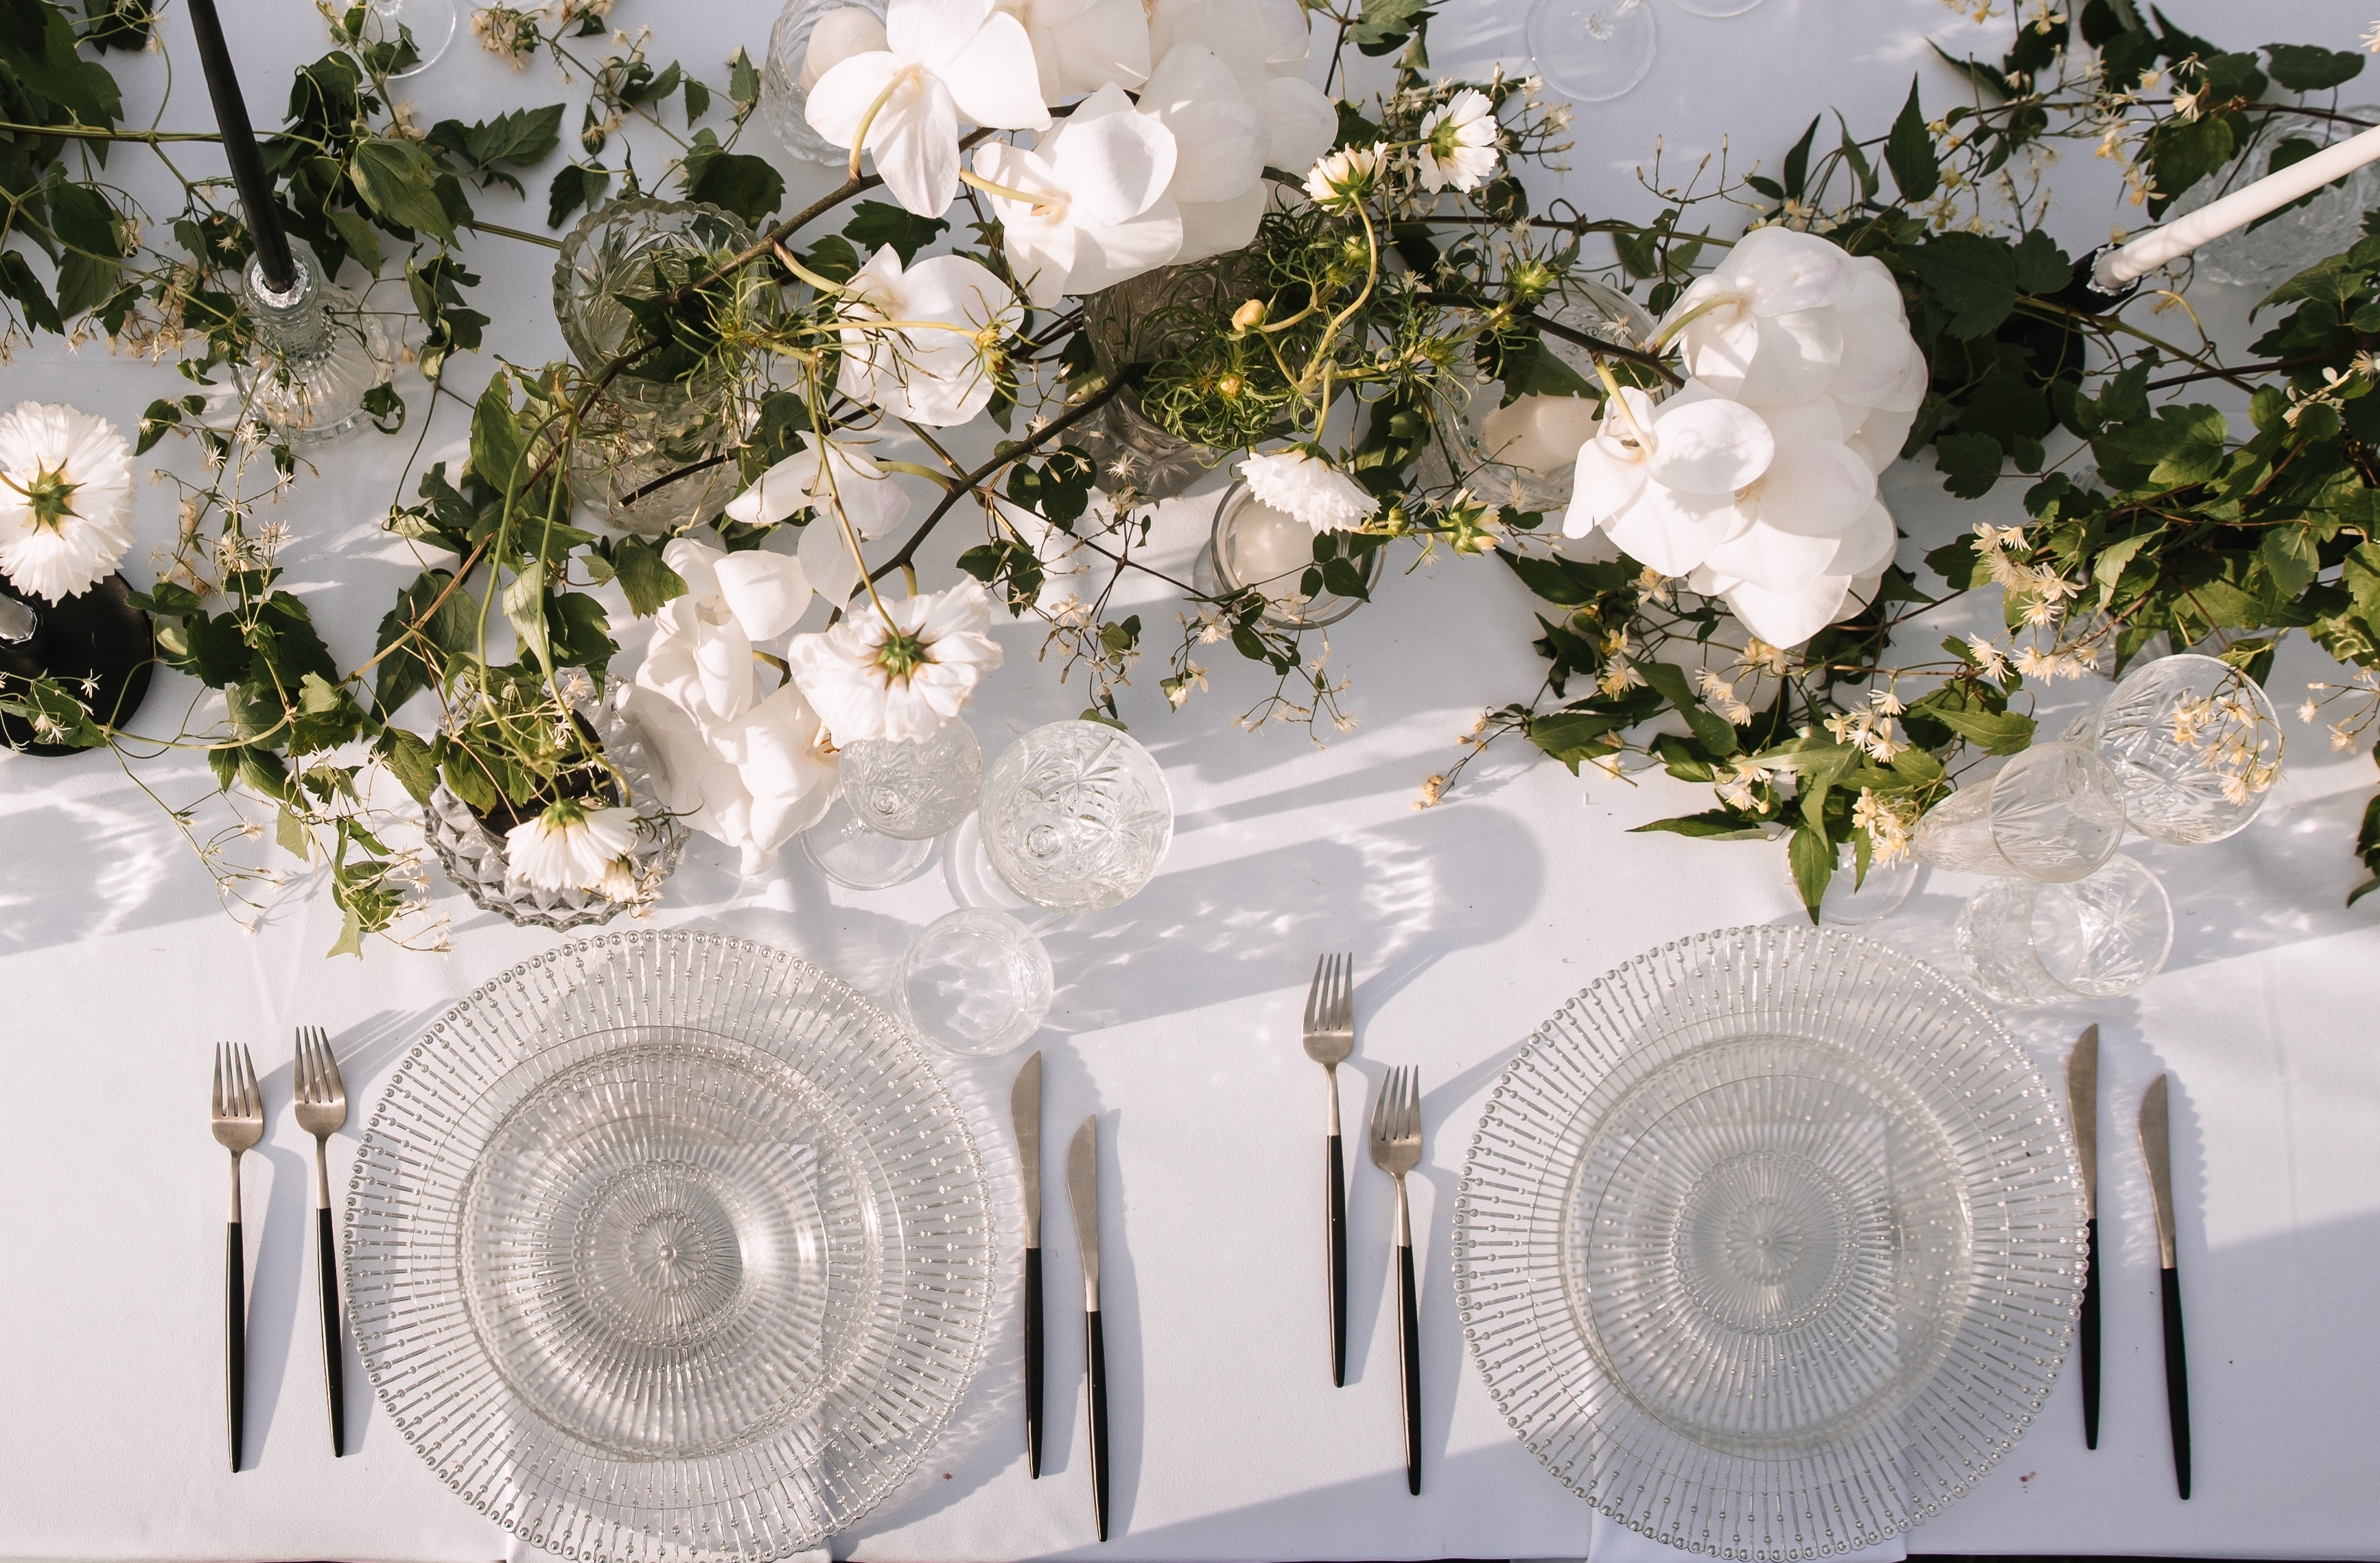 a tabletop with white linen cloth, clear glass embellished chargers and glasses, white and green floral runner and silver and black modern cutley